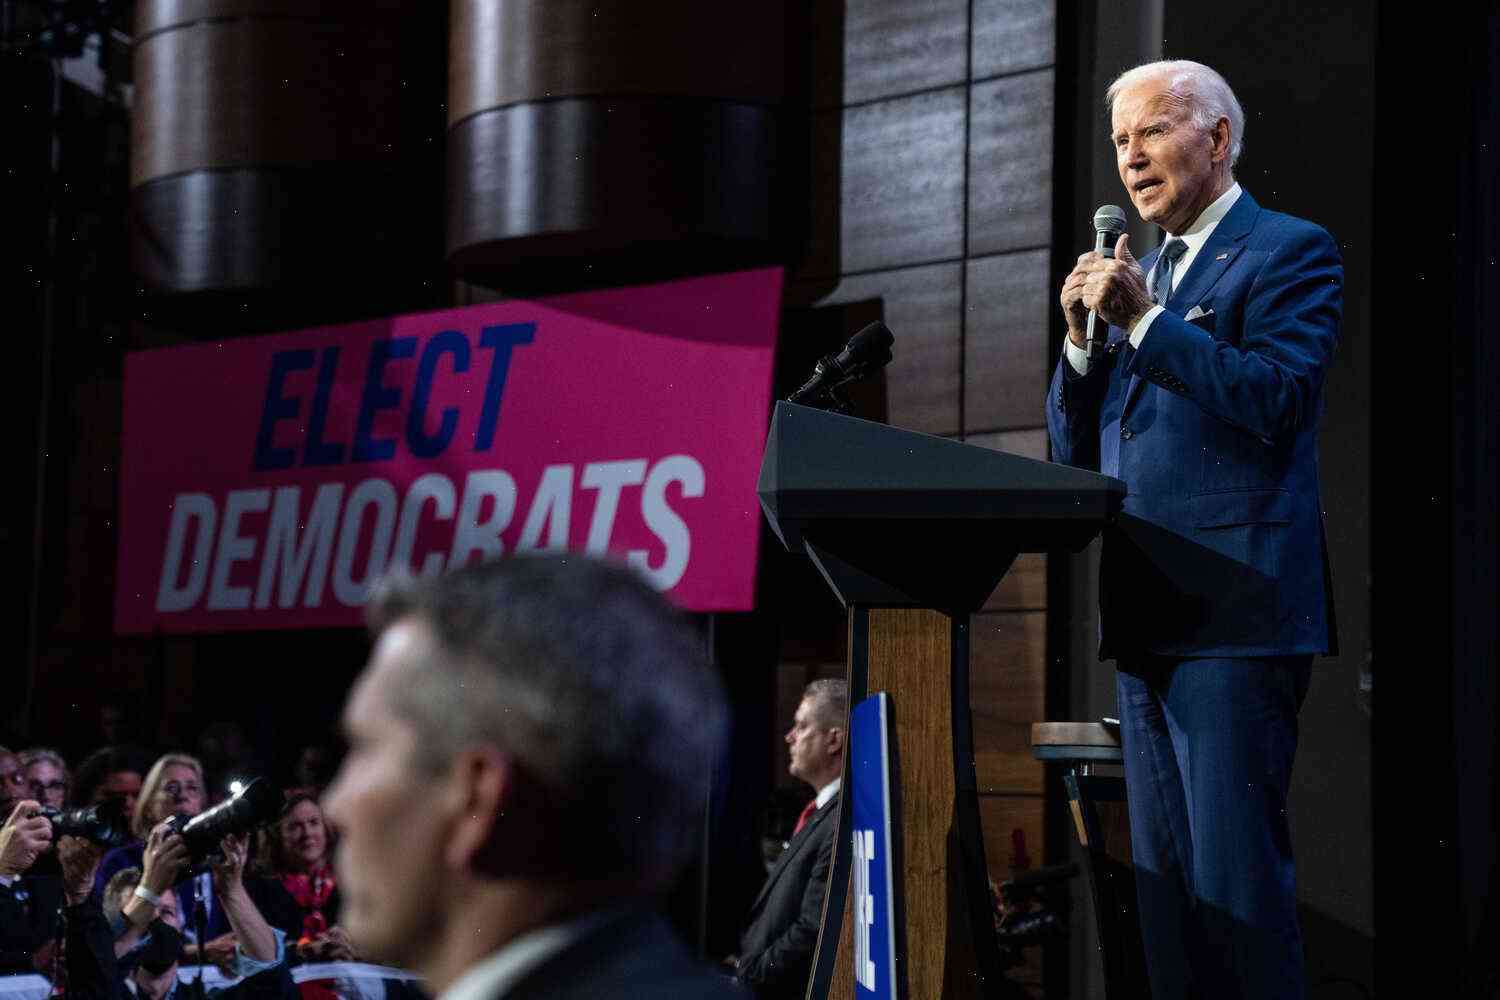 Biden’s Pro-Choice Campaign Is Taking a Big Step Forward